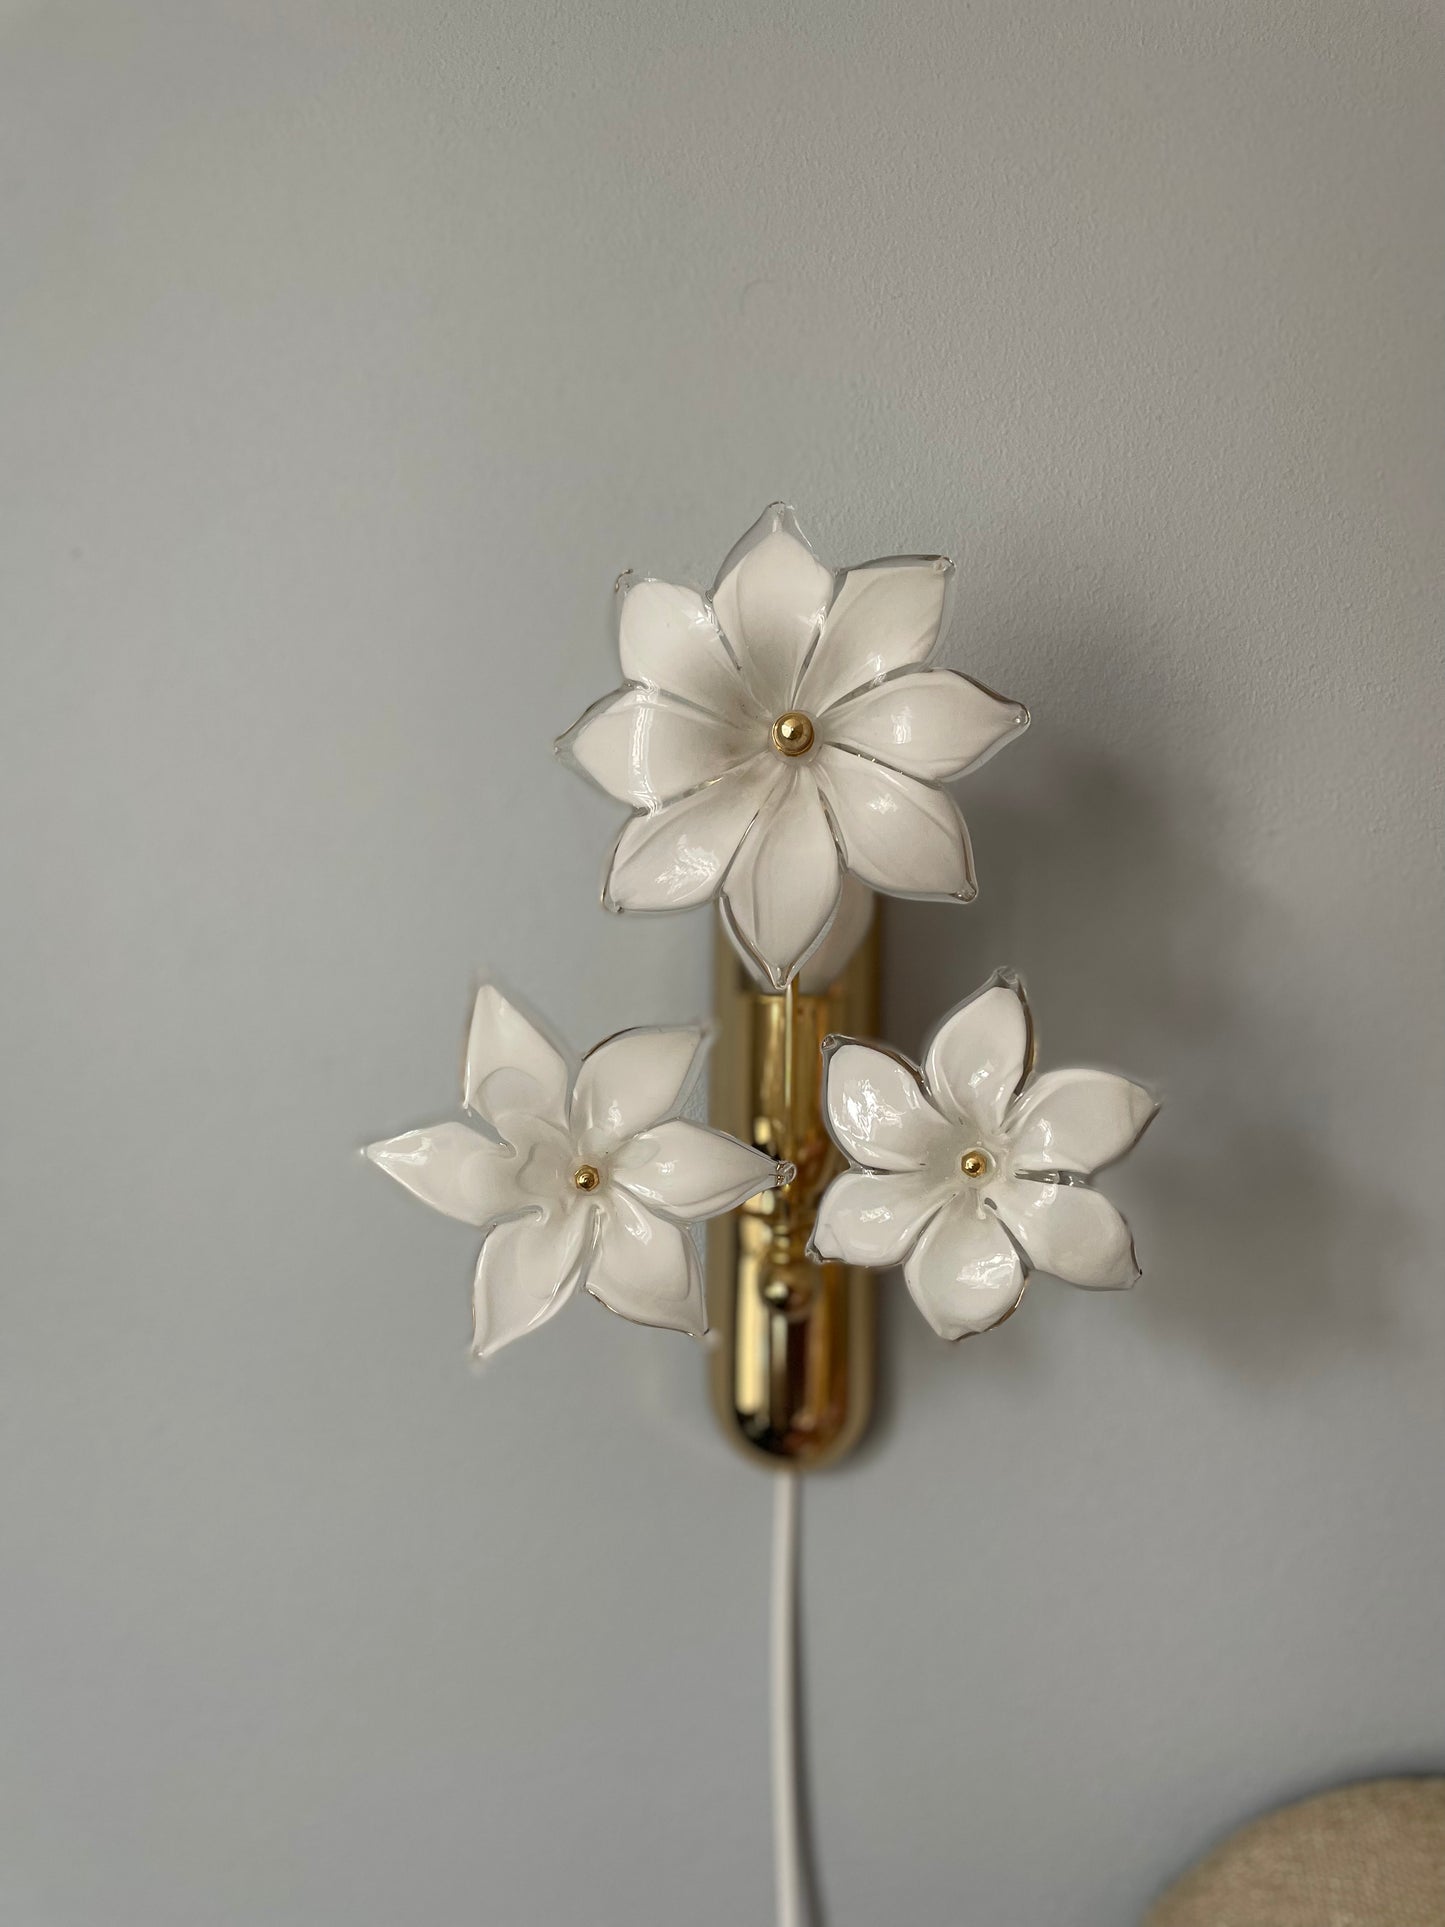 Set of vintage Murano wall lamps in brass with white flowers